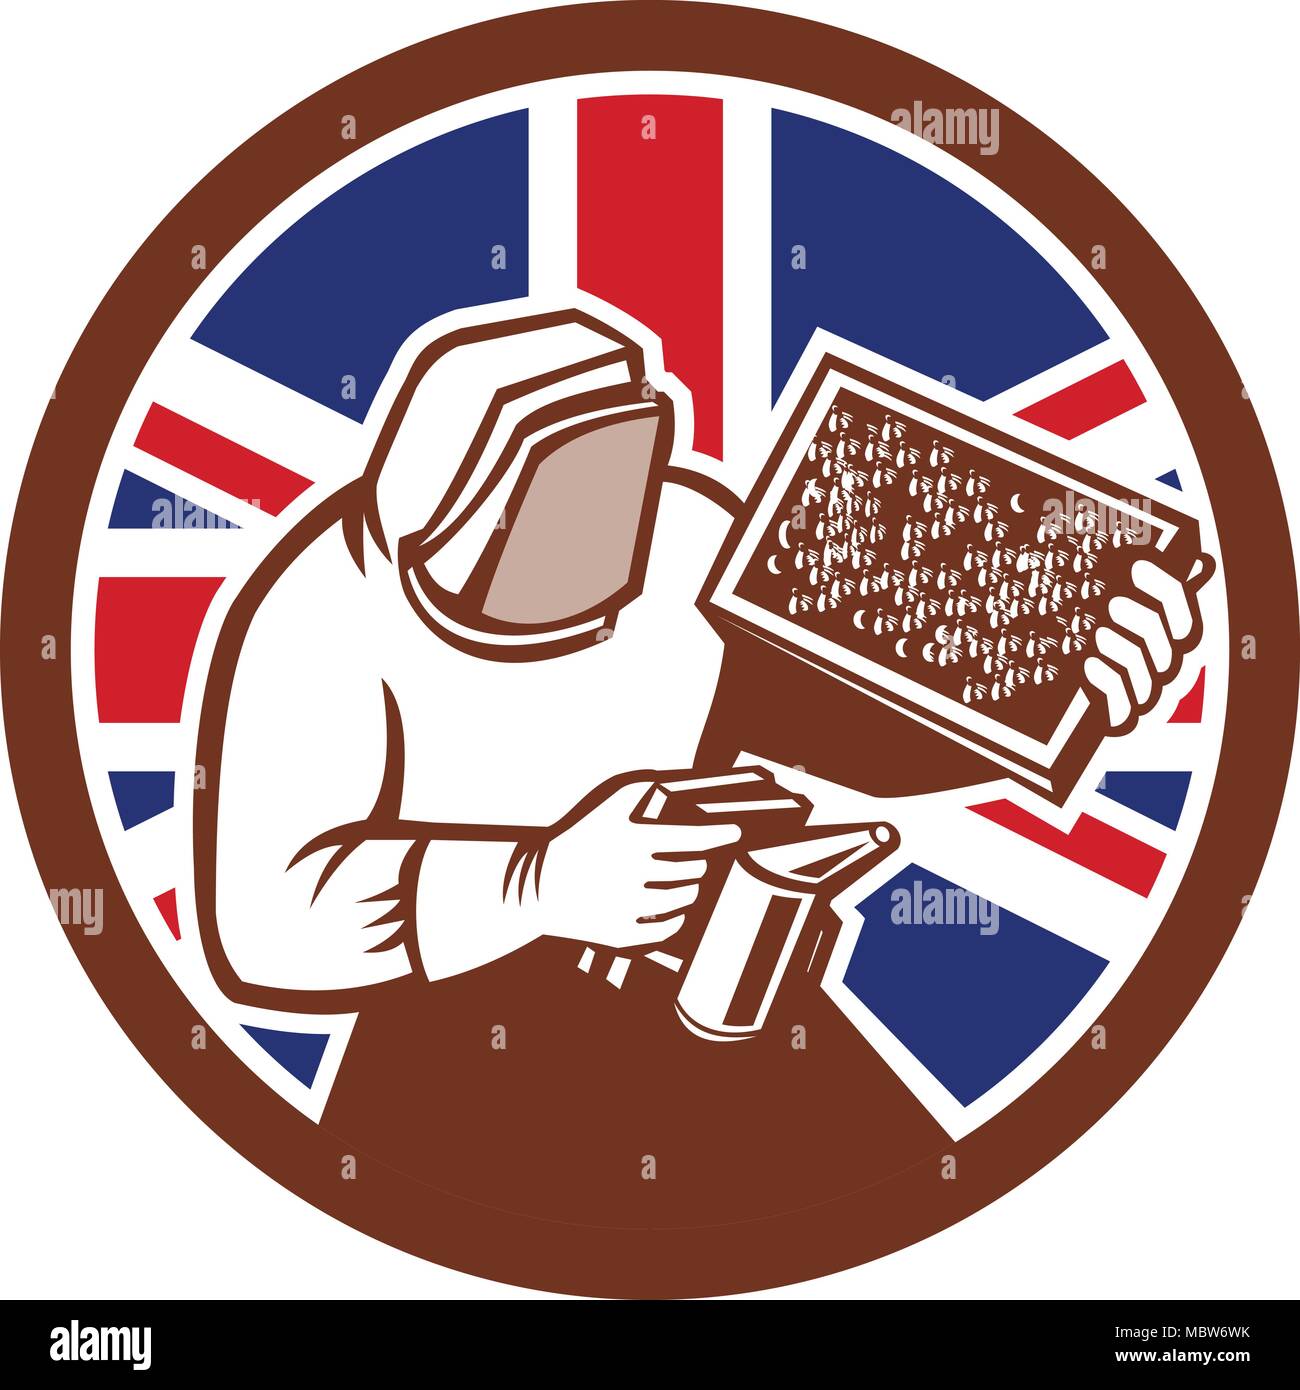 Icon retro style illustration of a British beekeeper, honey farmer, apiarist, or apiculturist, holding a smoker and beehive with United Kingdom UK, Gr Stock Vector